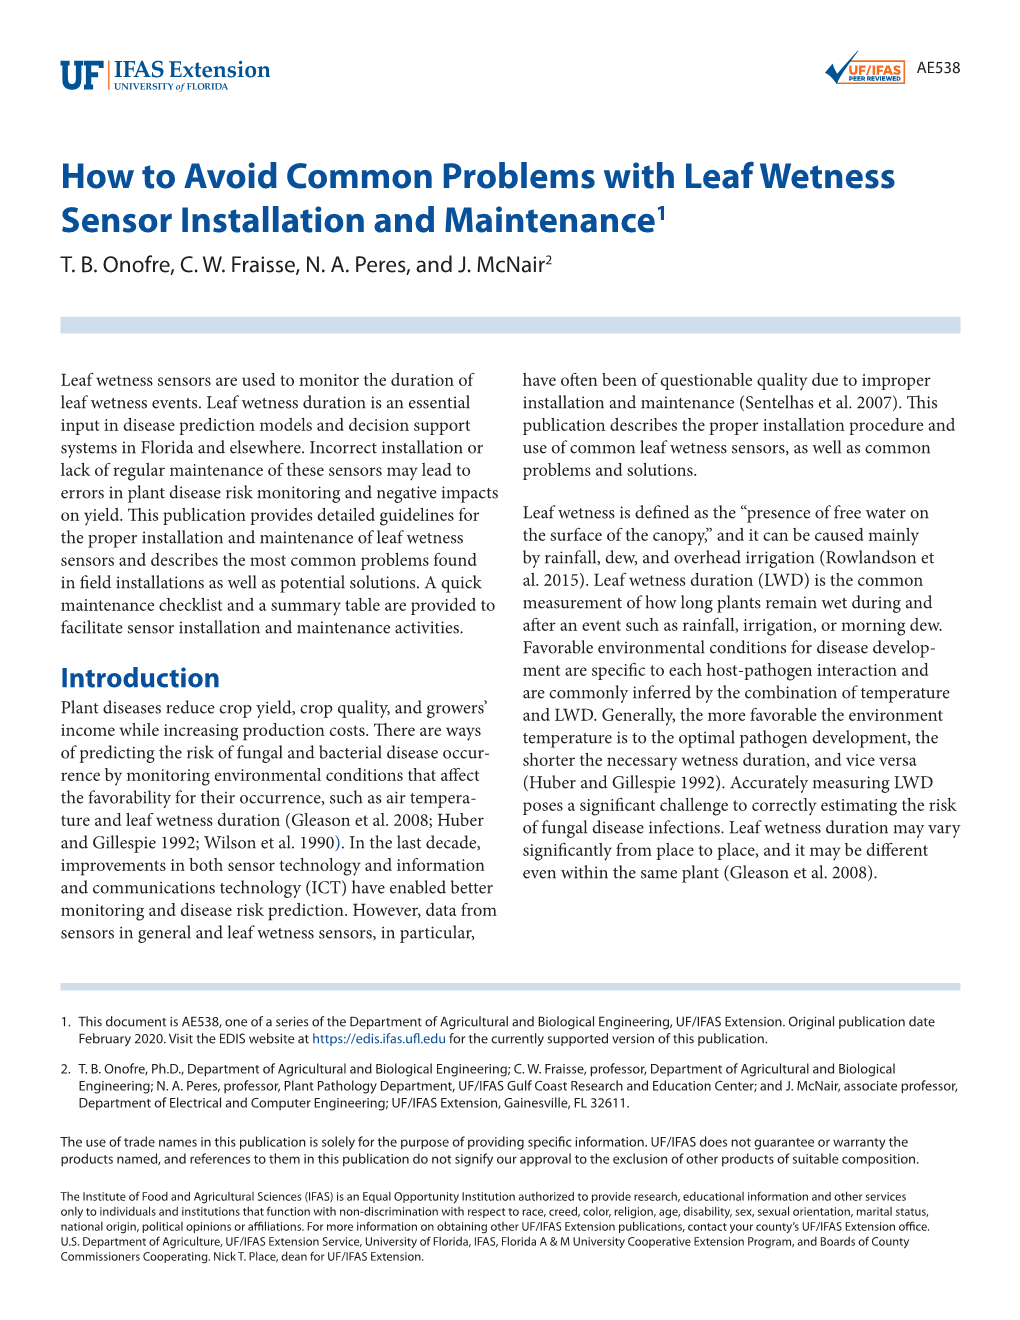 How to Avoid Common Problems with Leaf Wetness Sensor Installation and Maintenance1 T